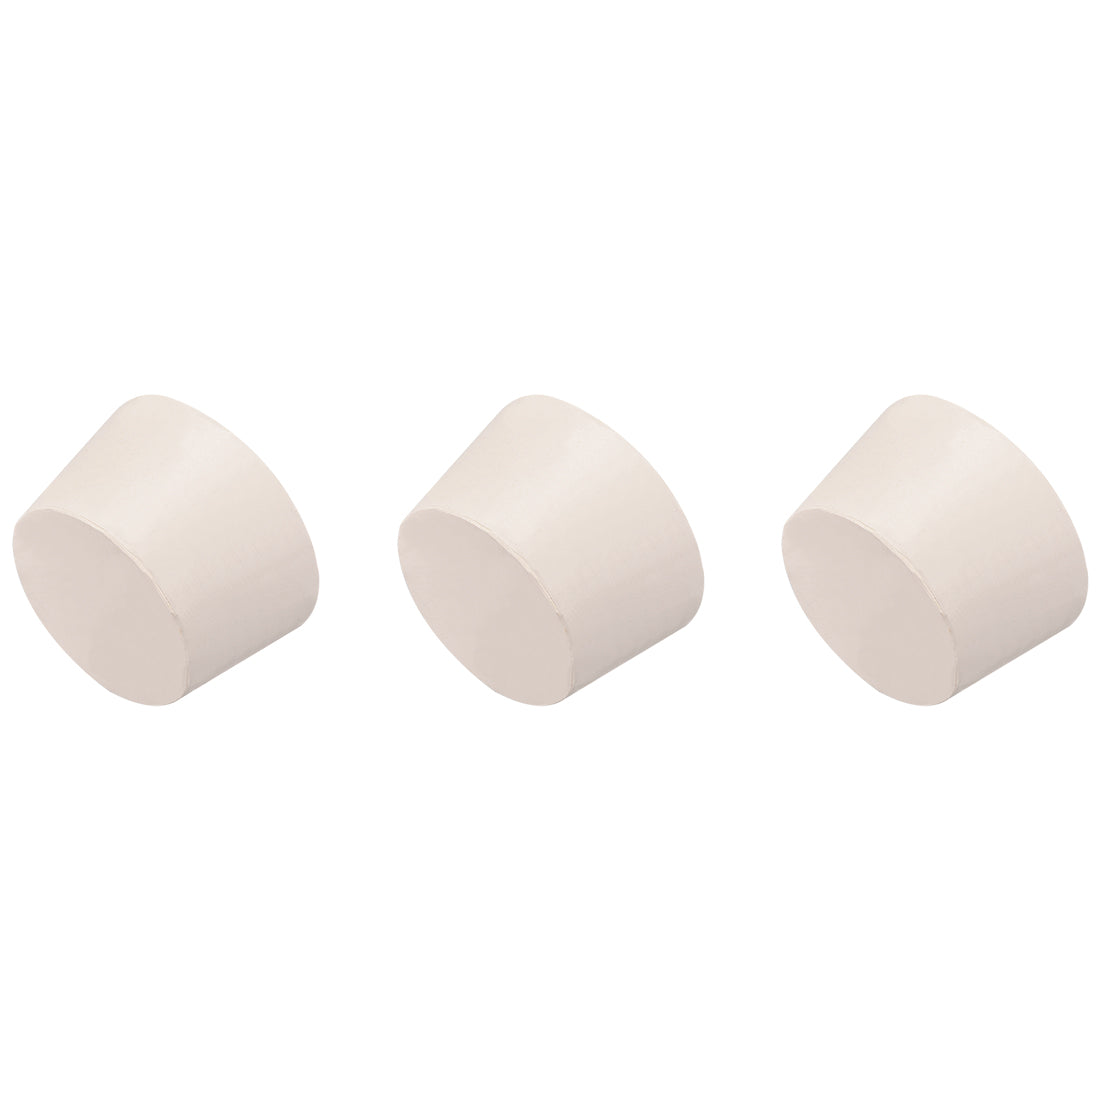 Uxcell Uxcell White Tapered Shaped Solid Rubber Stopper for Lab Tube Stopper Size 9 3pcs